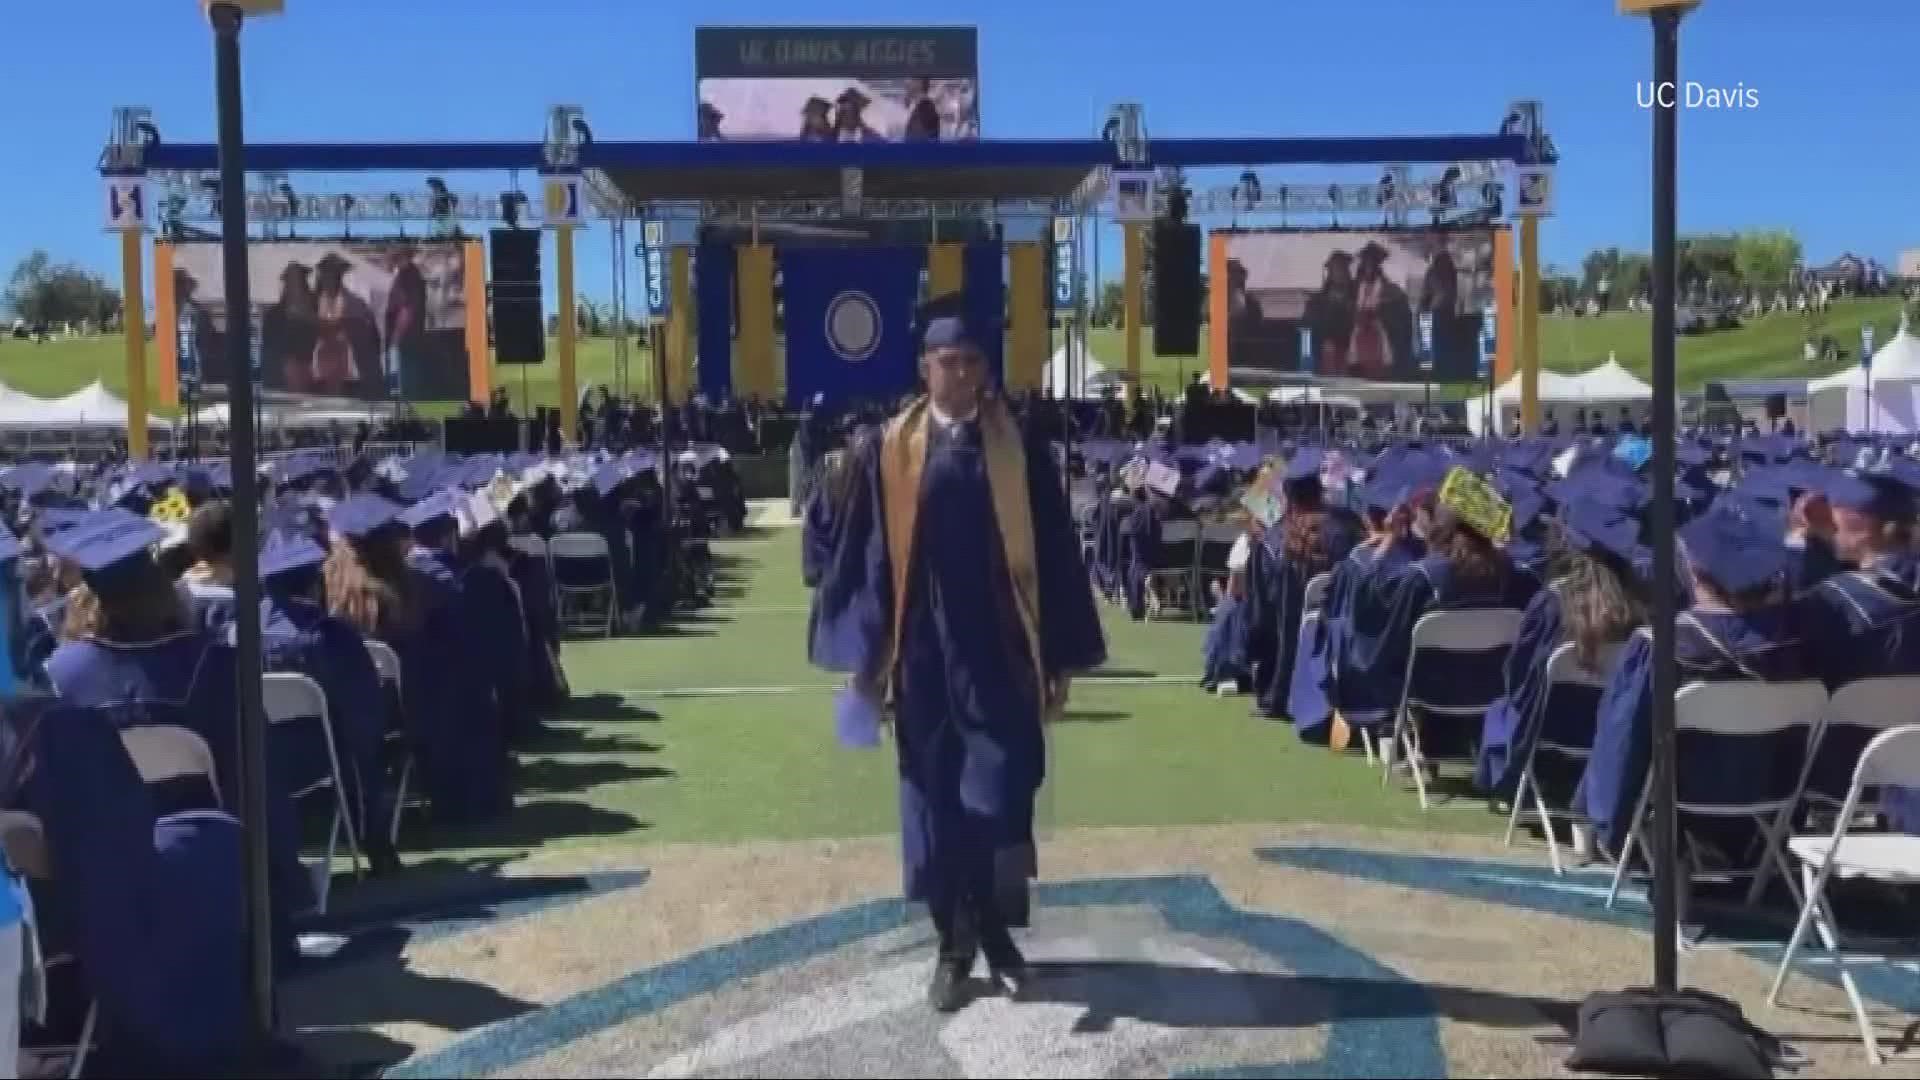 The June commencement ceremony left hundreds of students without a chance to walk across the stage due to extreme heat.